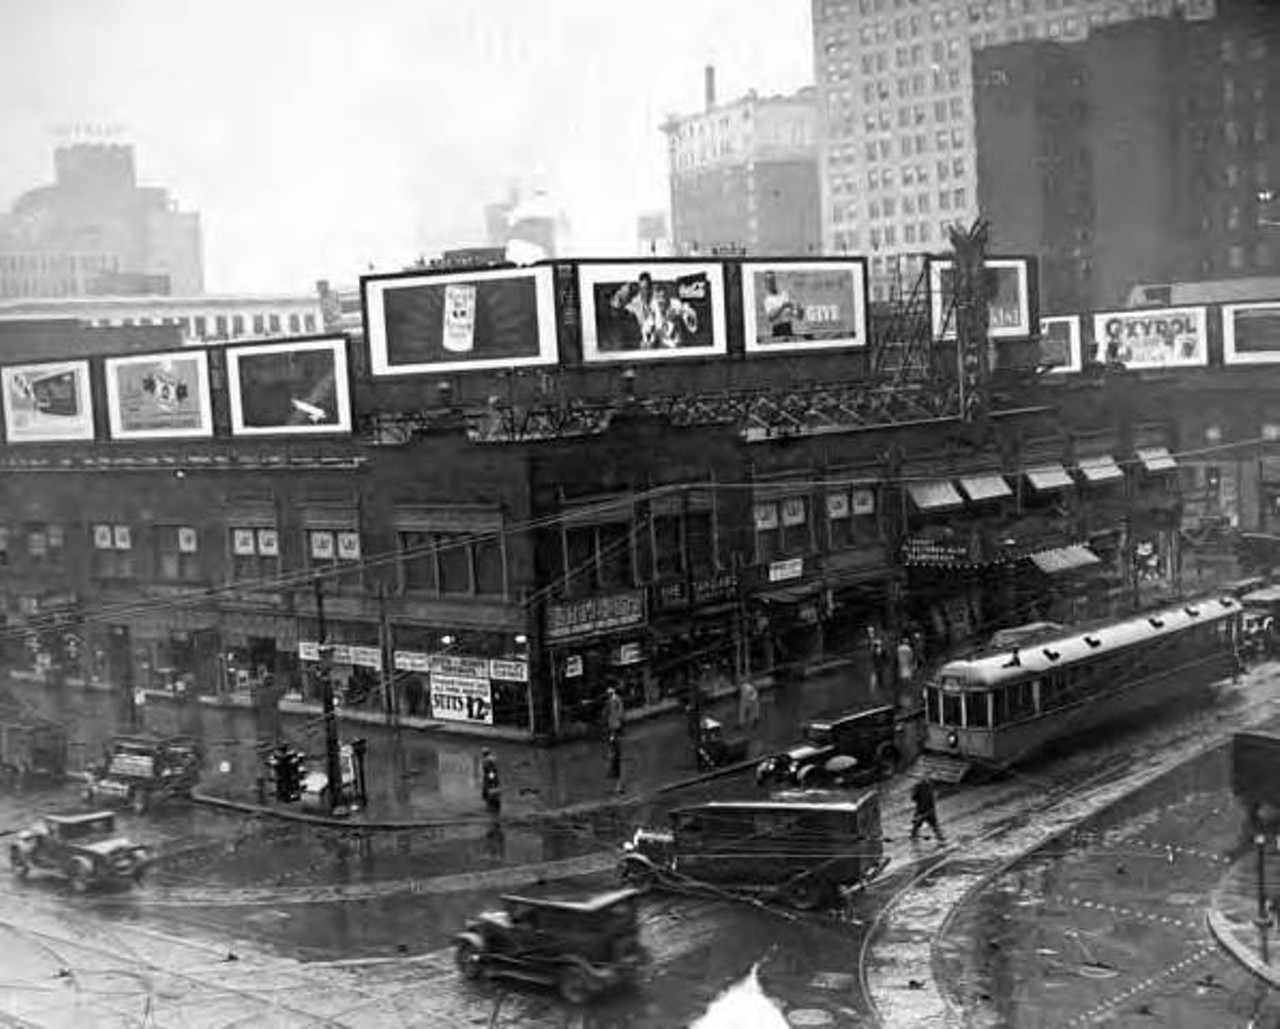 Corner of East 9th Street and Superior Avenue, 1931